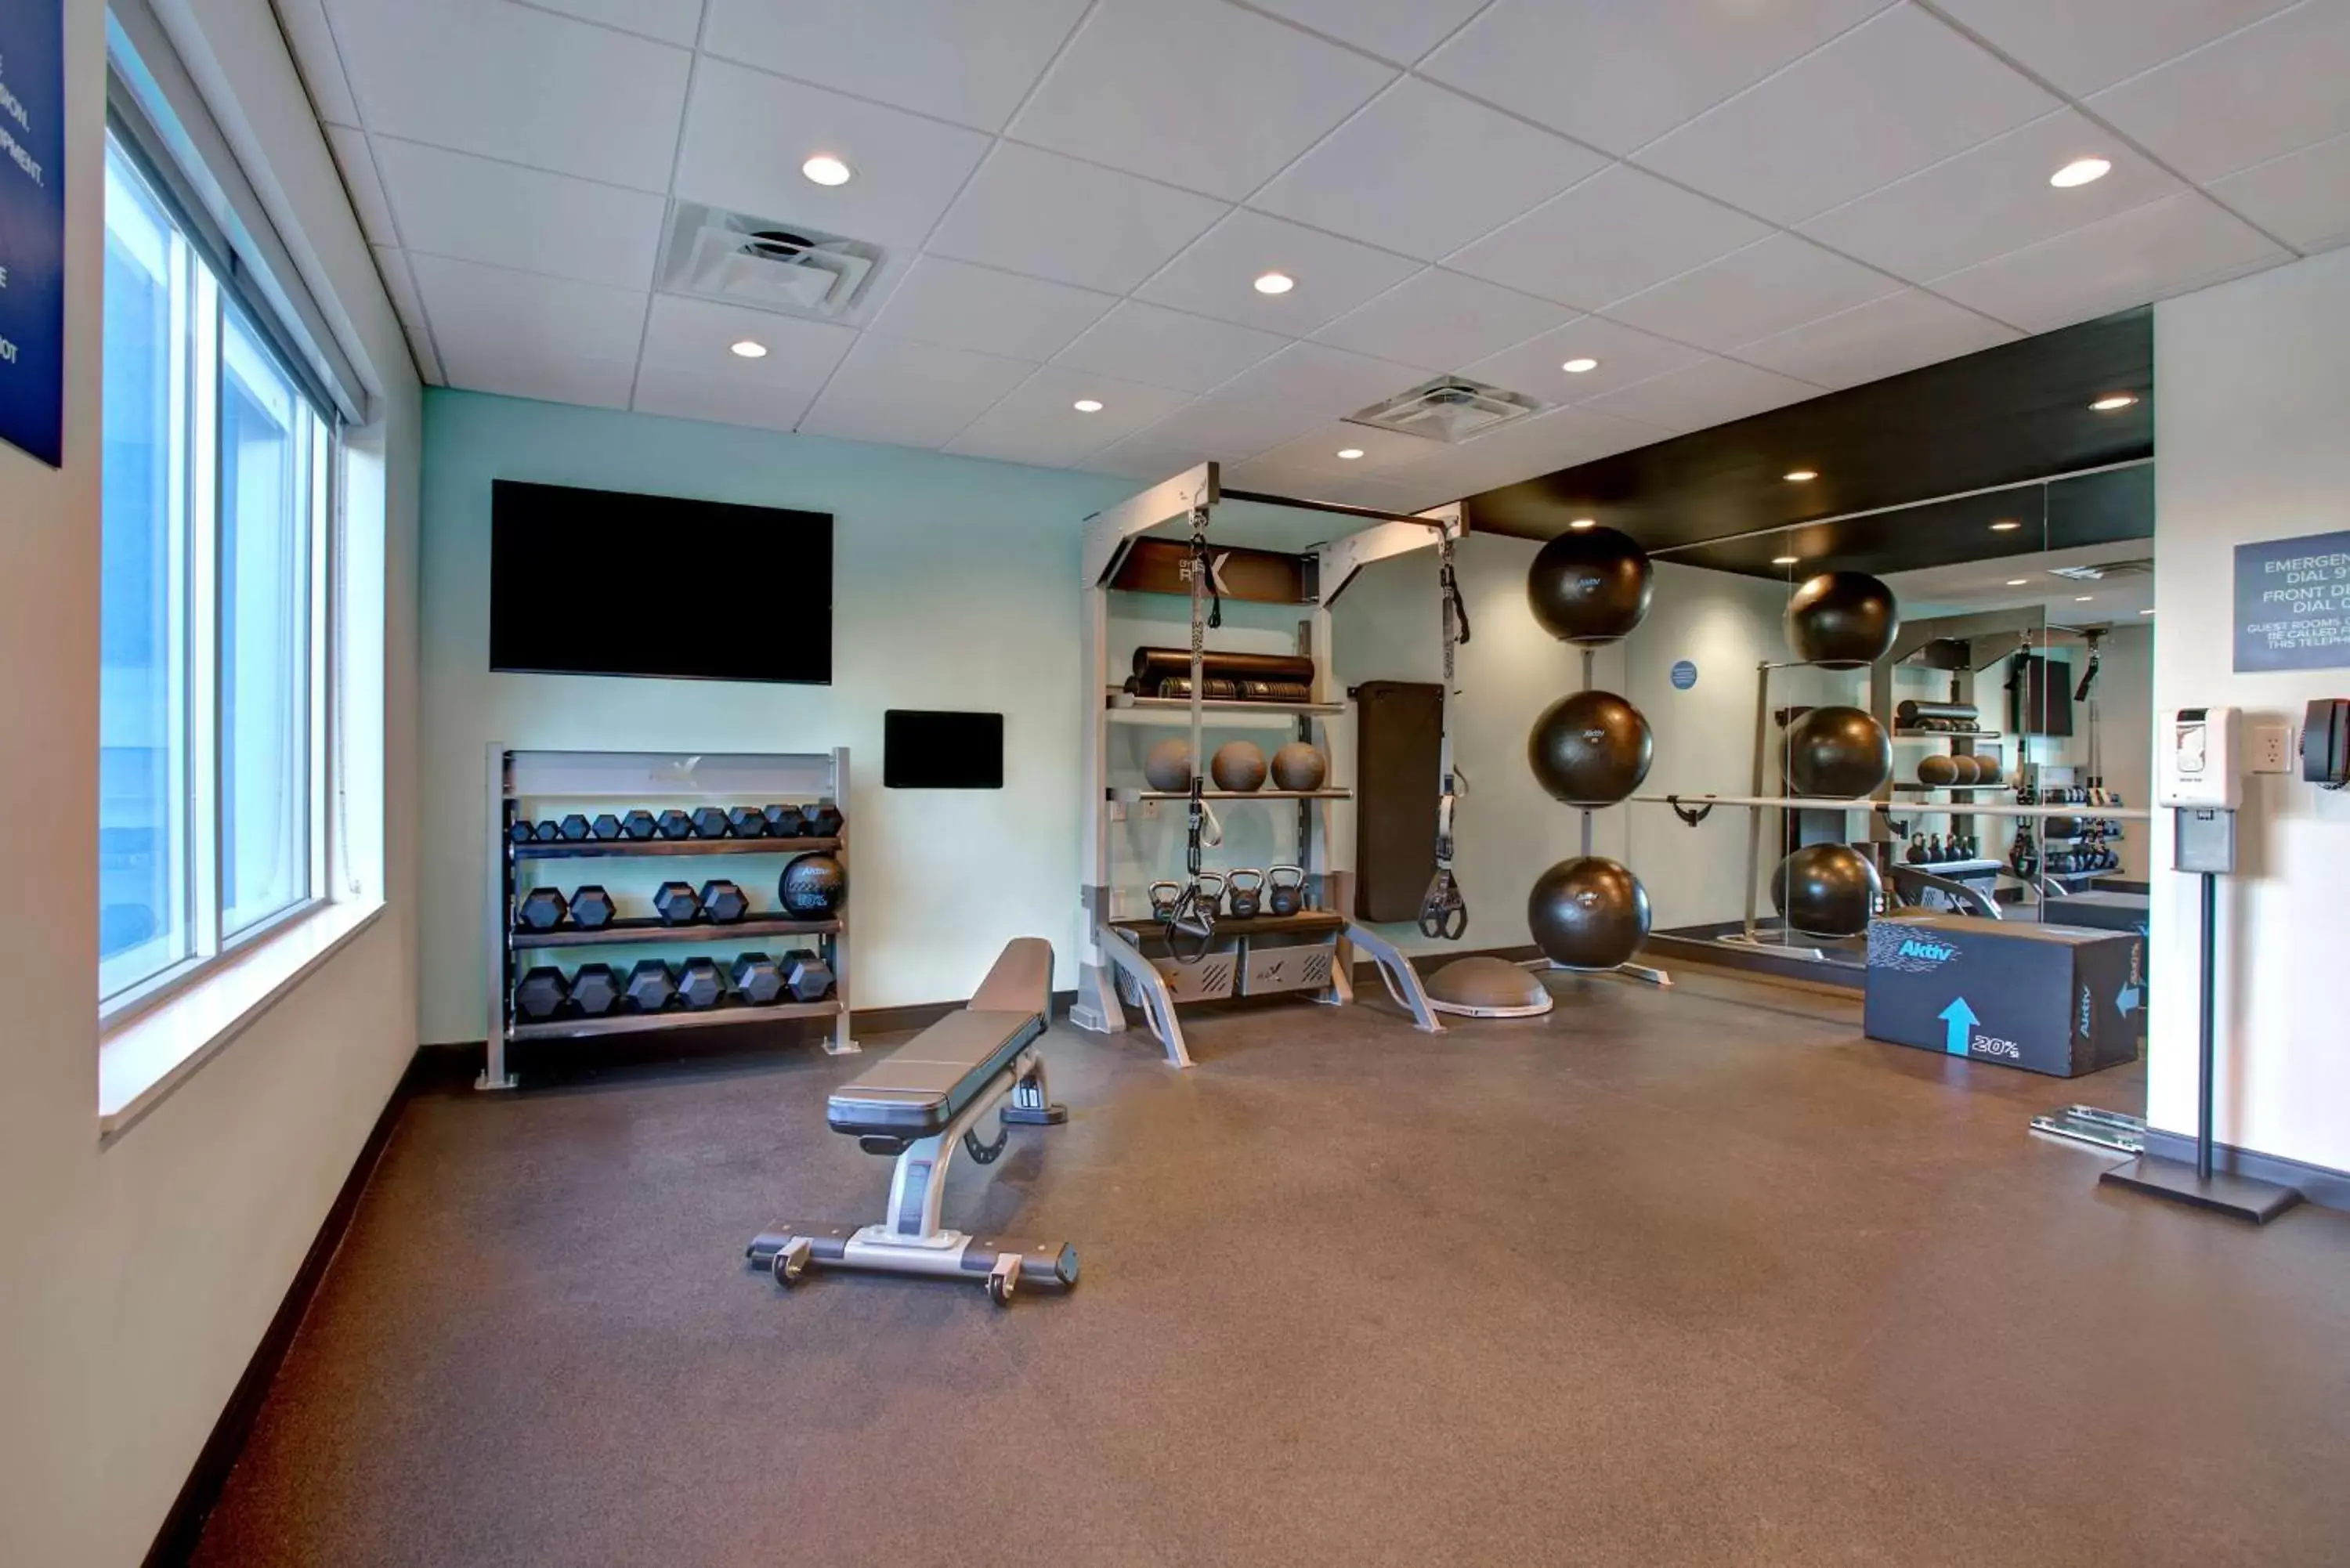 Fitness centre/facilities, Fitness Center/Facilities in Tru By Hilton Northlake Fort Worth, Tx